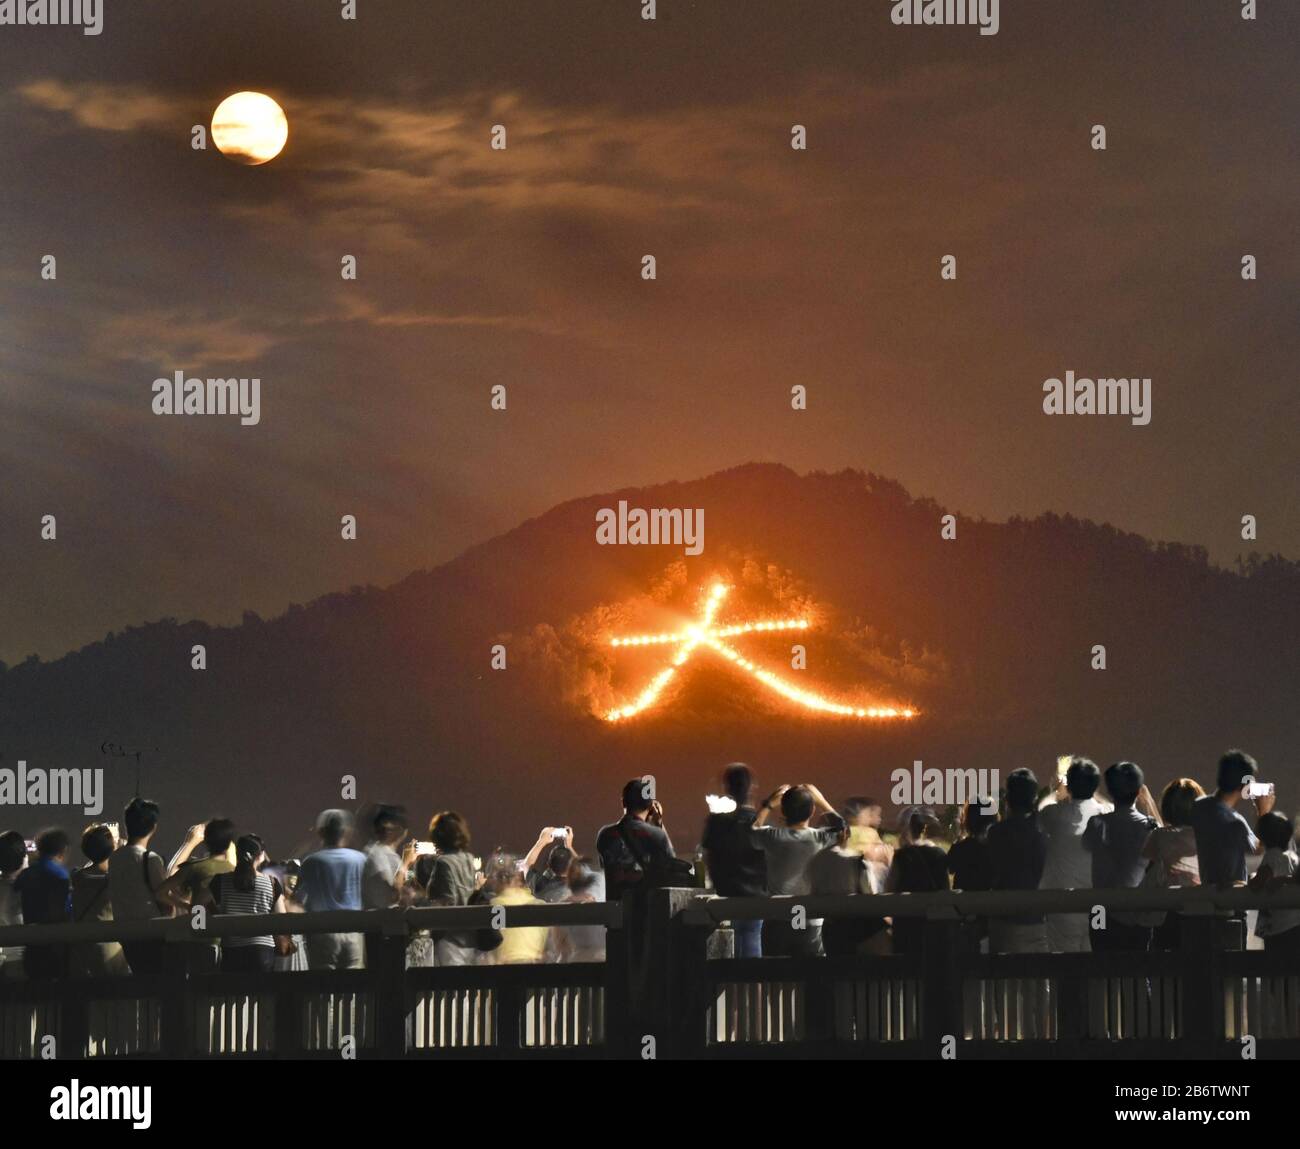 Photo taken on the night of Aug. 16, 2019, shows a bonfire in the shape of a giant Chinese character meaning "large" on a mountain side during the Daimonji Festival, one of the most famous events in Kyoto. In the festival, formally known as Gozan no Okuribi, five giant bonfires are lit on mountains surrounding the city in the culmination of the Obon period in summer. In Japan, it is believed that each year during Obon, ancestors' spirits return to this world in order to visit their relatives. The purpose of the bonfires is to guide these souls back to heaven. (Kyodo)==Kyodo Photo via Newscom Stock Photo